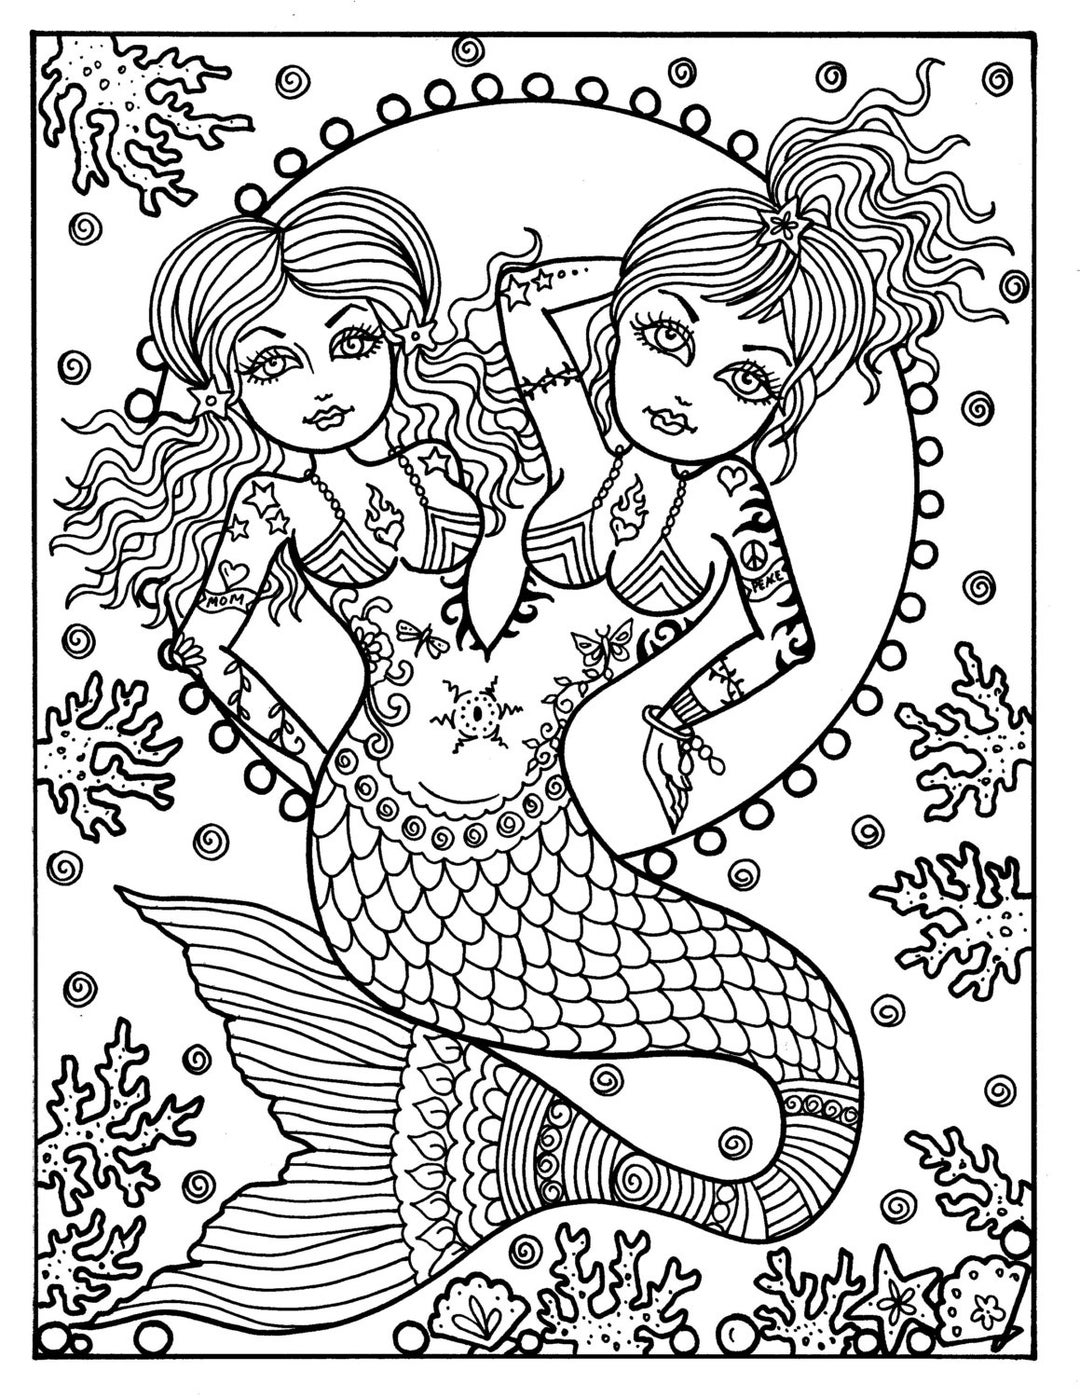 Instant Download Mermaids Coloring Page Adult Coloring Books Fantasy ...